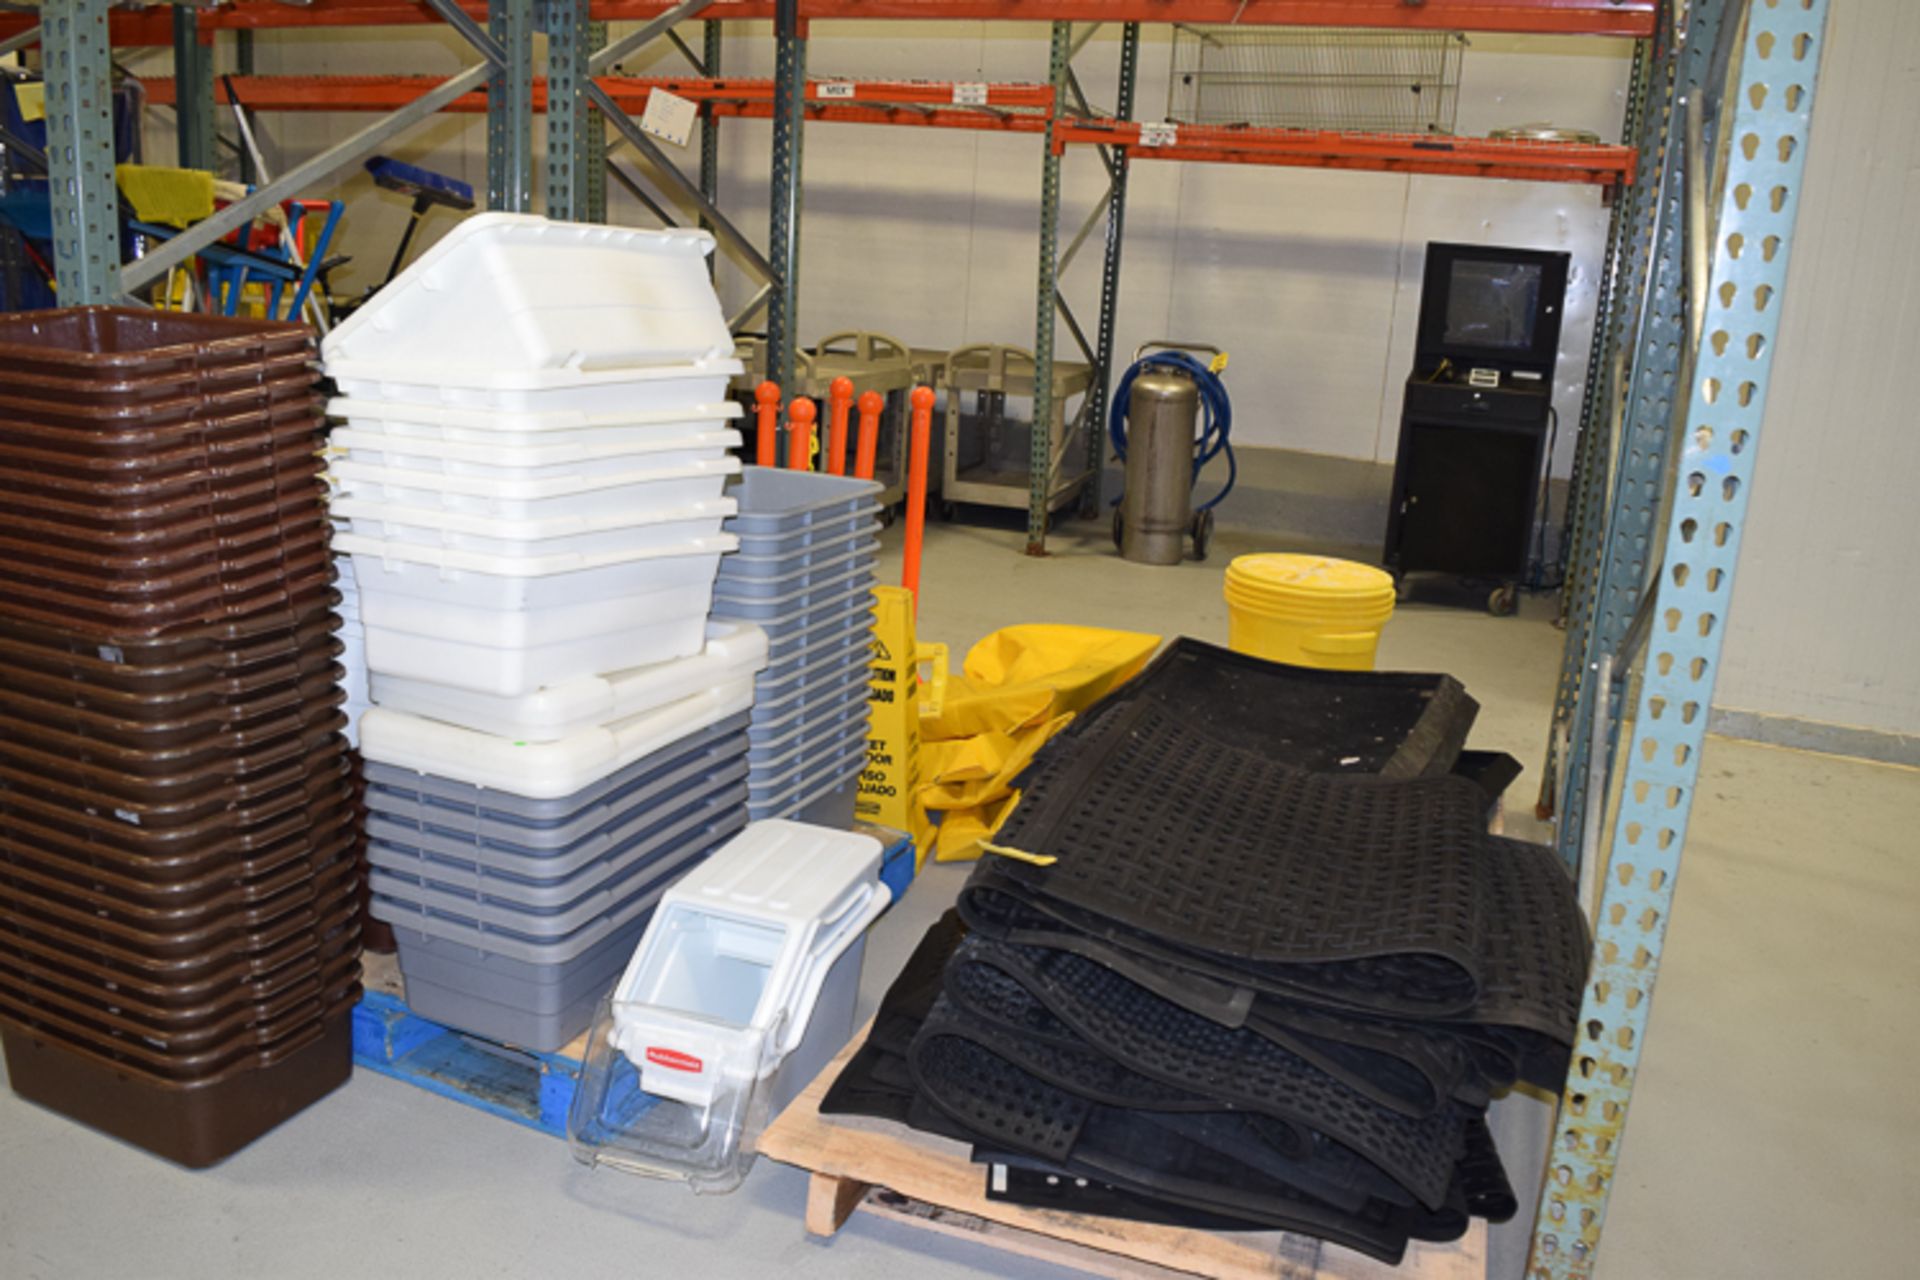 Floor Mats, Bins, Signs and Other Items, Rigging Fee: Please Contact US Rigging 920-655-2767